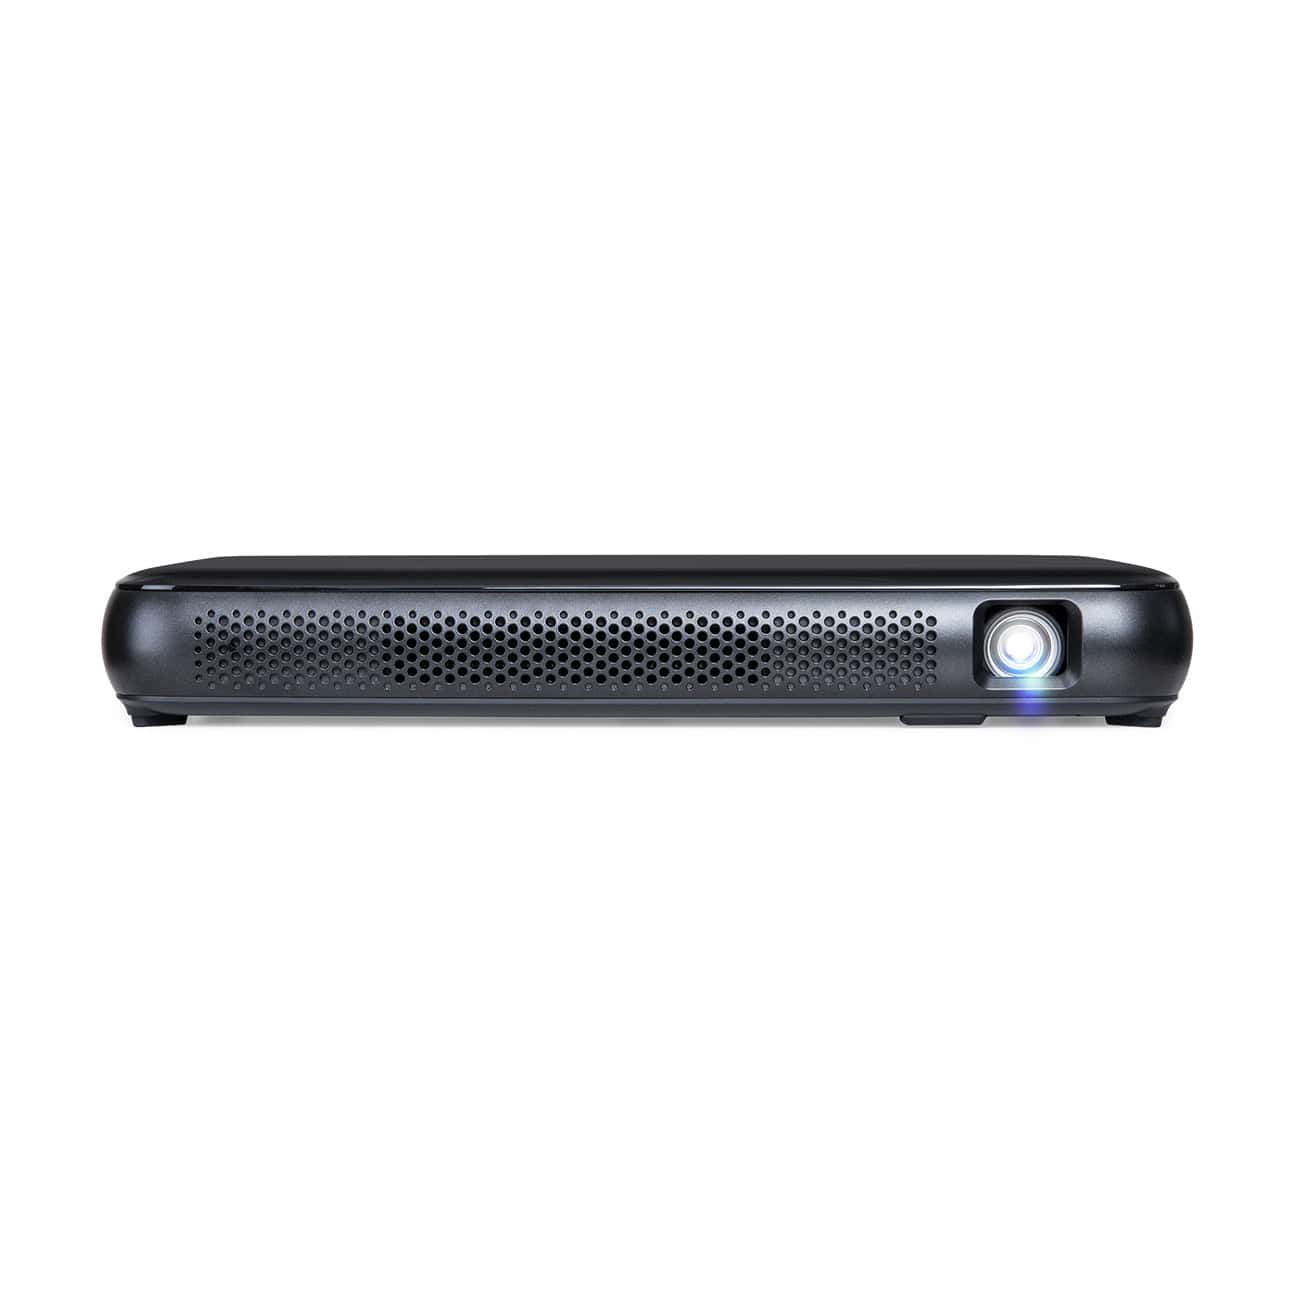 The Miroir M600 Full HD Pro 1080p projector is a compact and powerful device that offers stunning visuals and effortless connectivity.